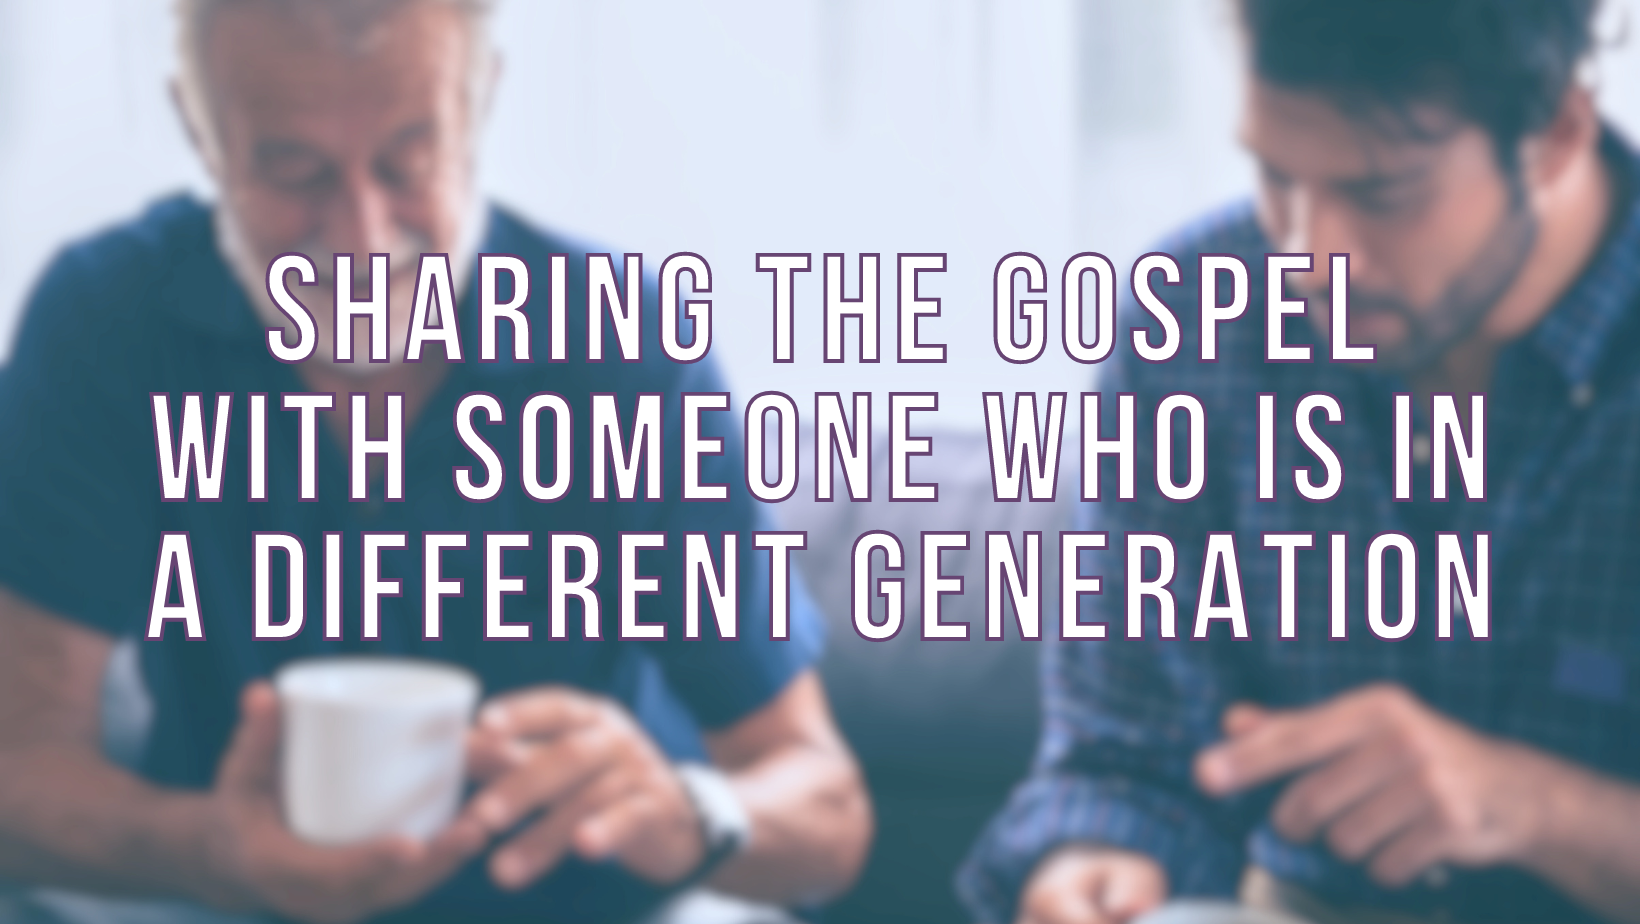 Sharing the Gospel with someone who is in a different generation